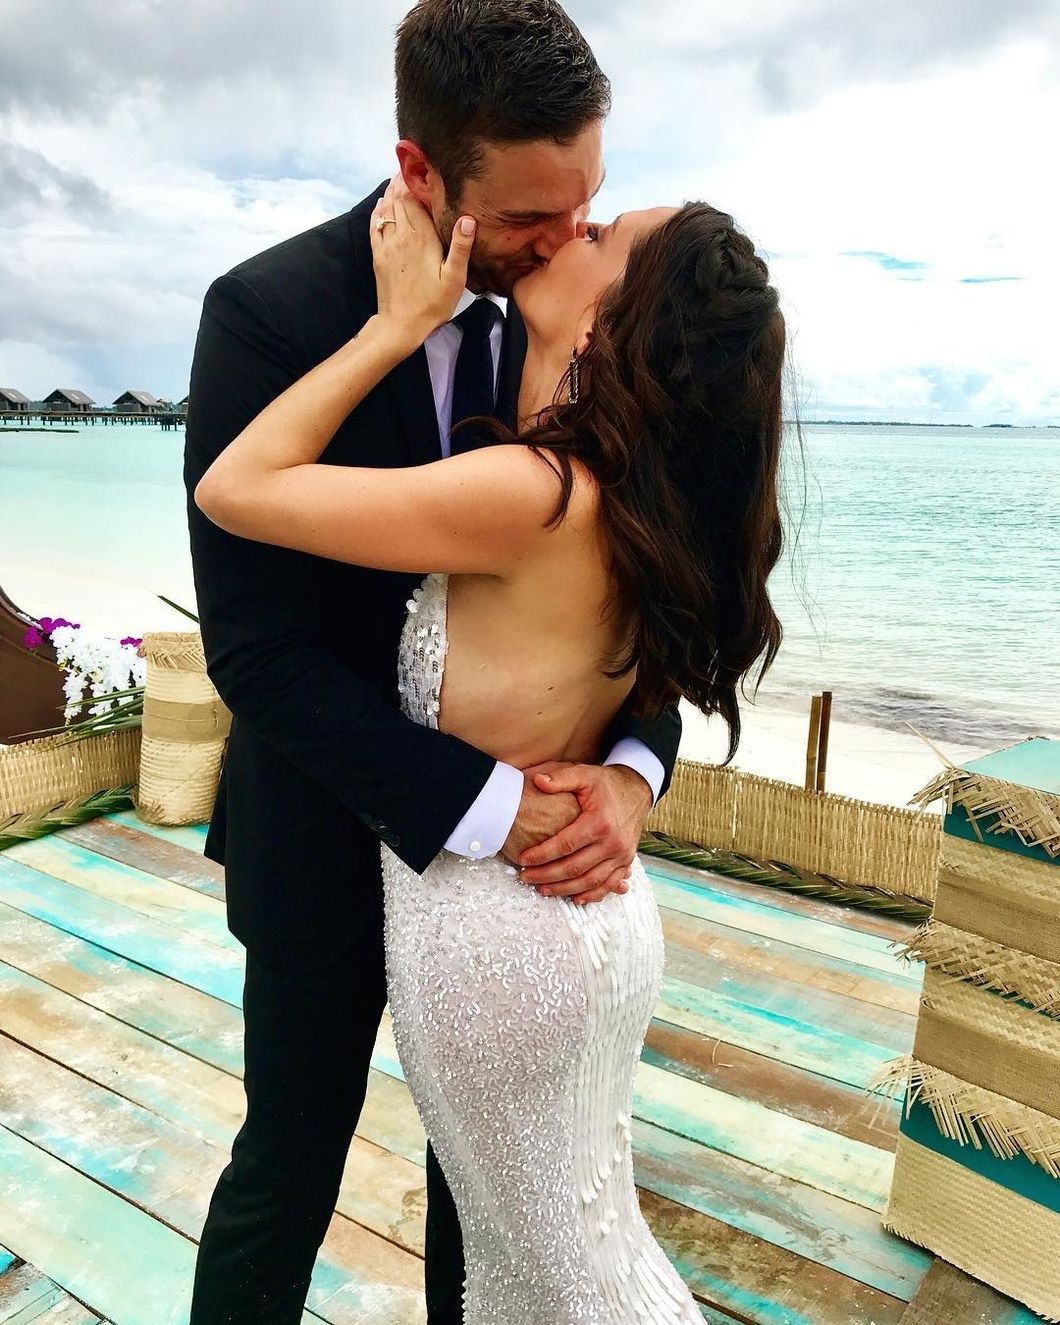 Everything You Need To Know About Becca's 'Bachelorette' Happy Ending